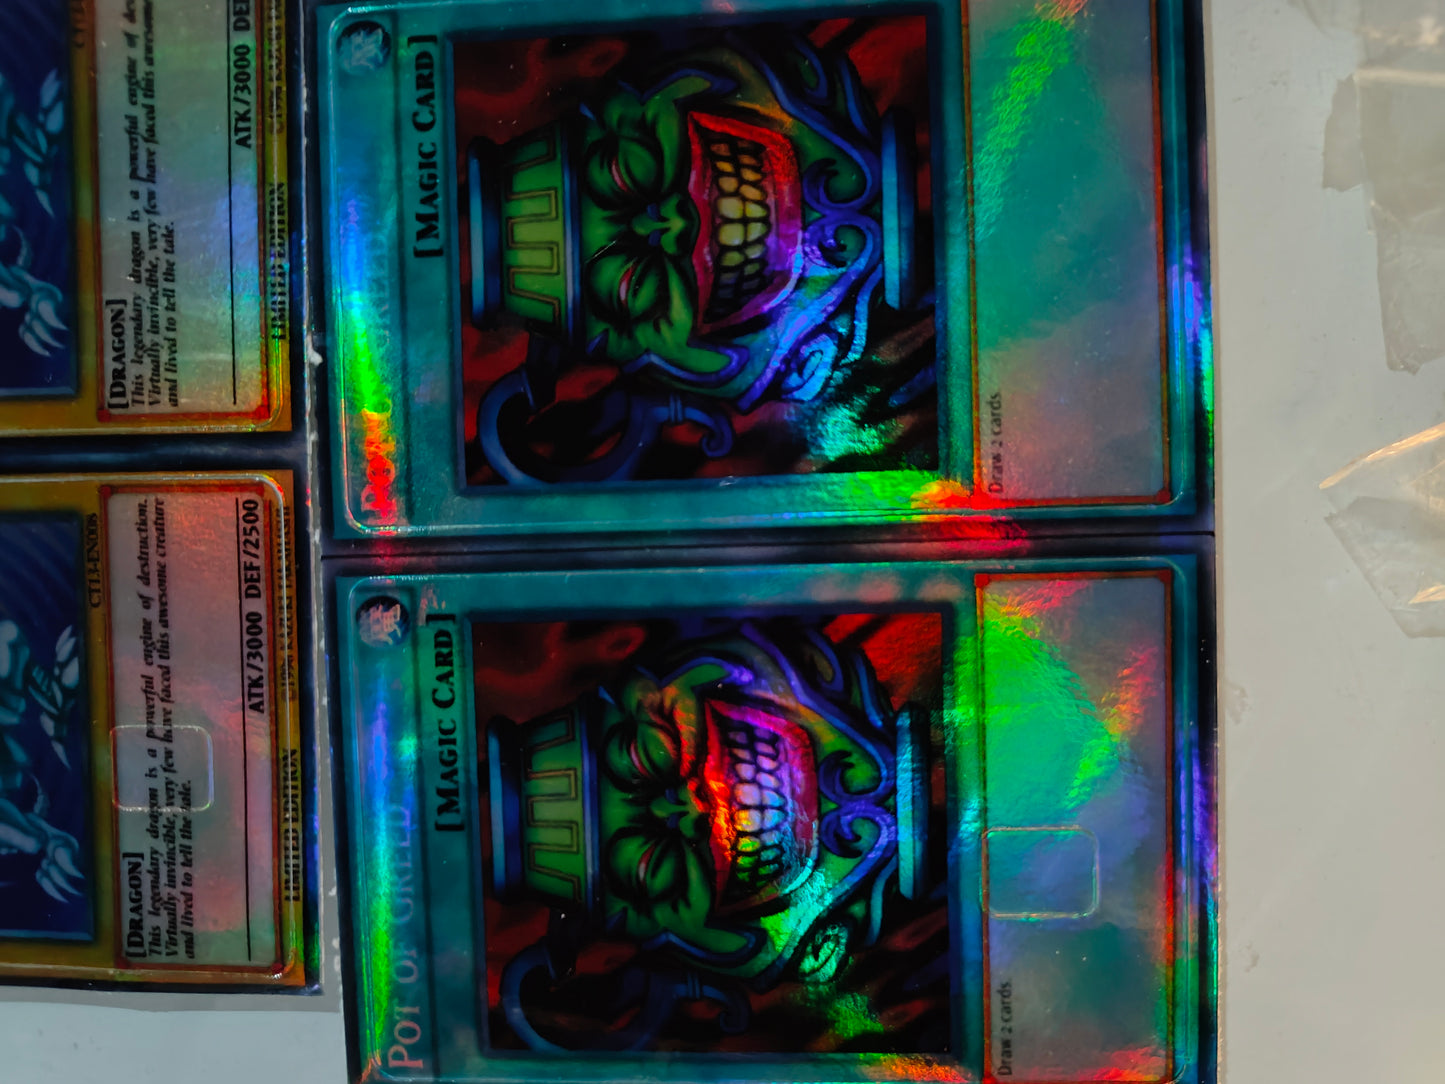 YuGiOh - Pot of Greed Holographic Credit Card Sticker (Please Read Description)